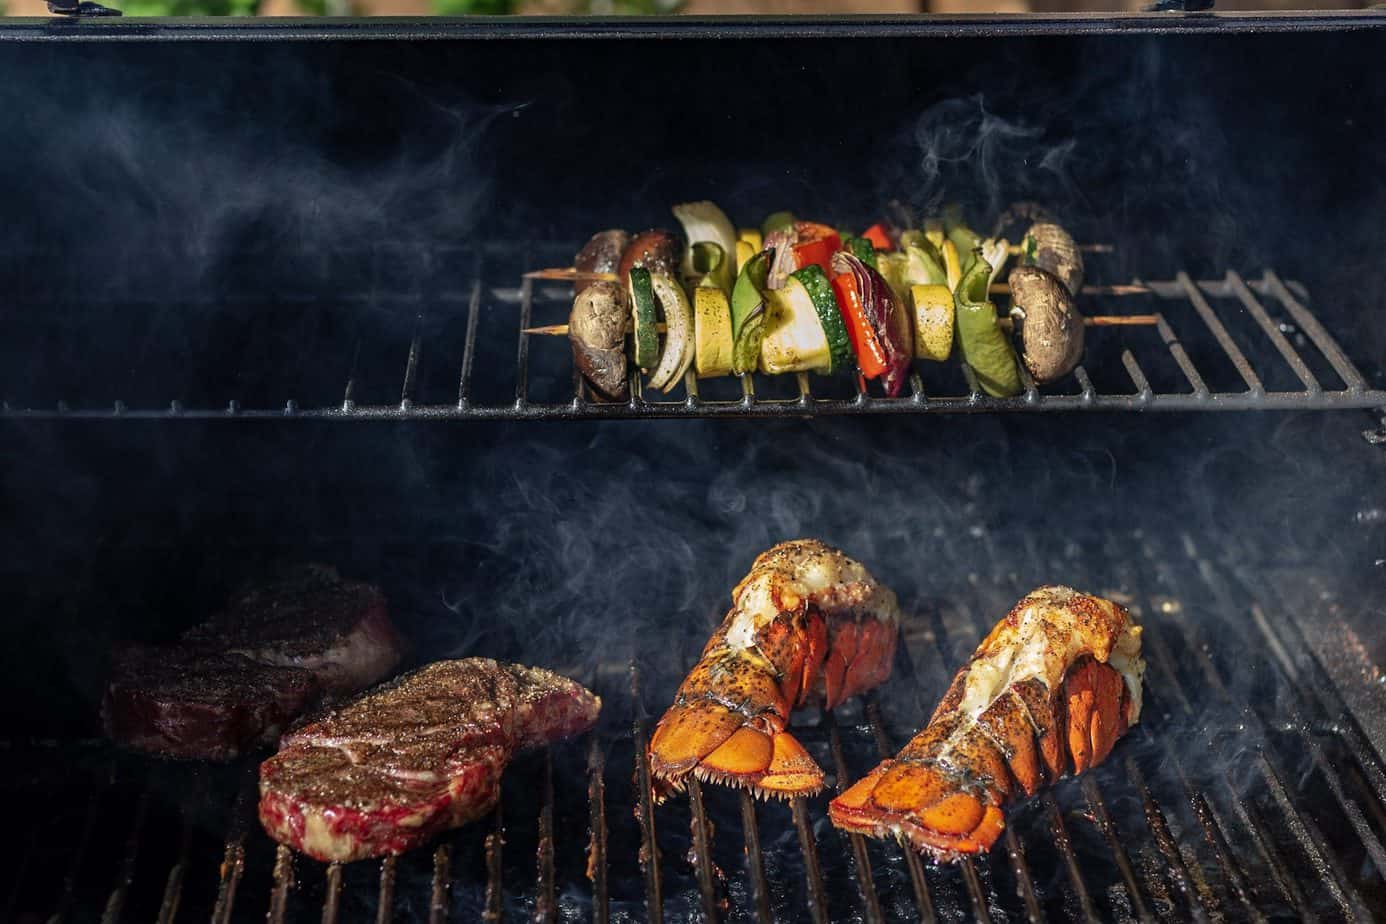 Dry aged ribeyes, vegetable kabobs, and lobster tails on a grill. Smoke can be seen lightly swirling around the food.